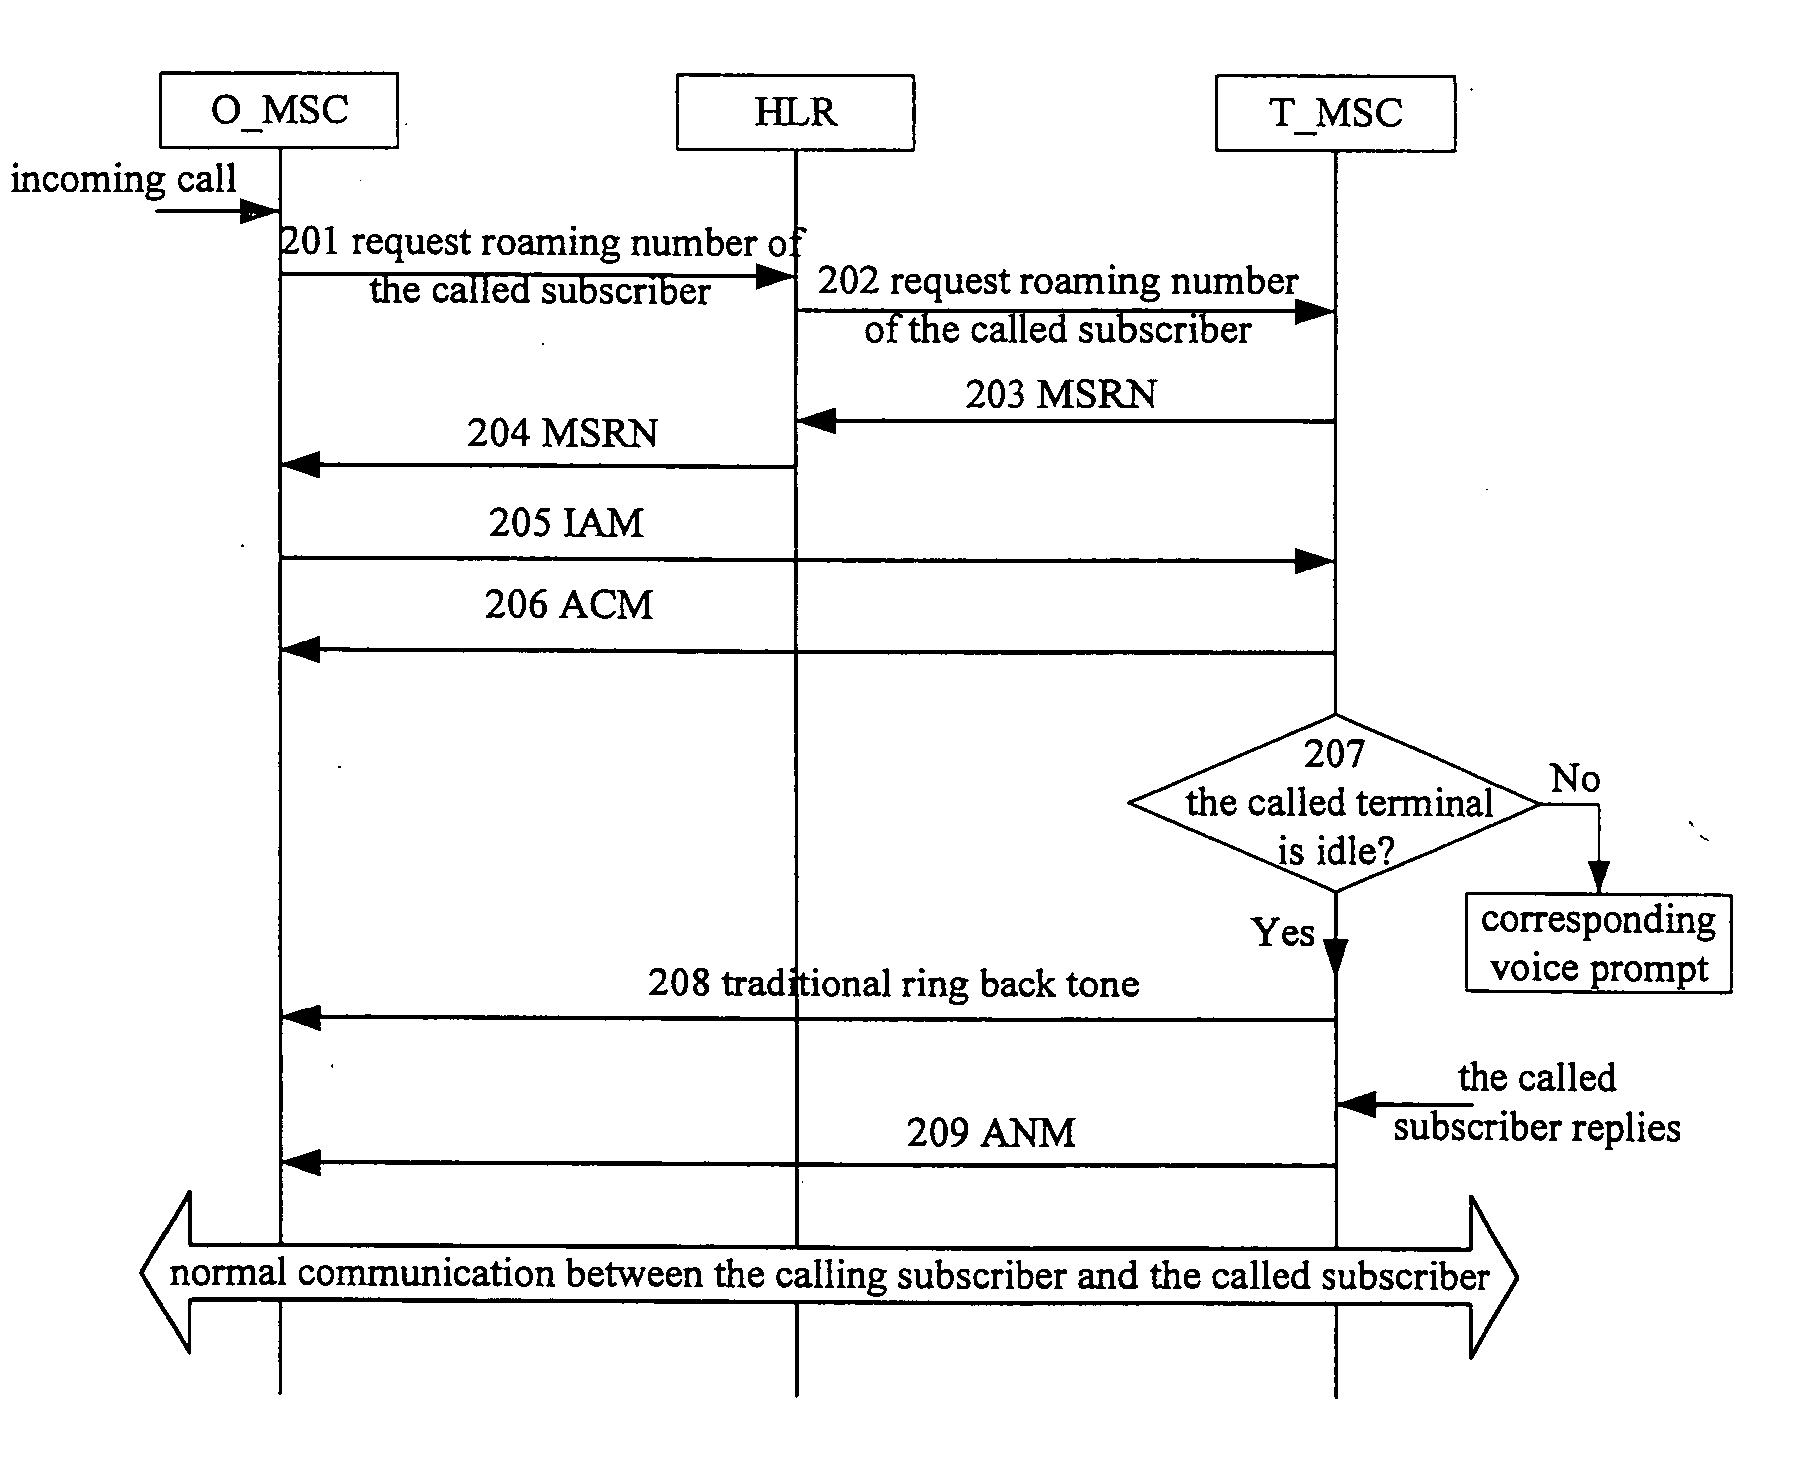 System and method for providing RBT in communication network